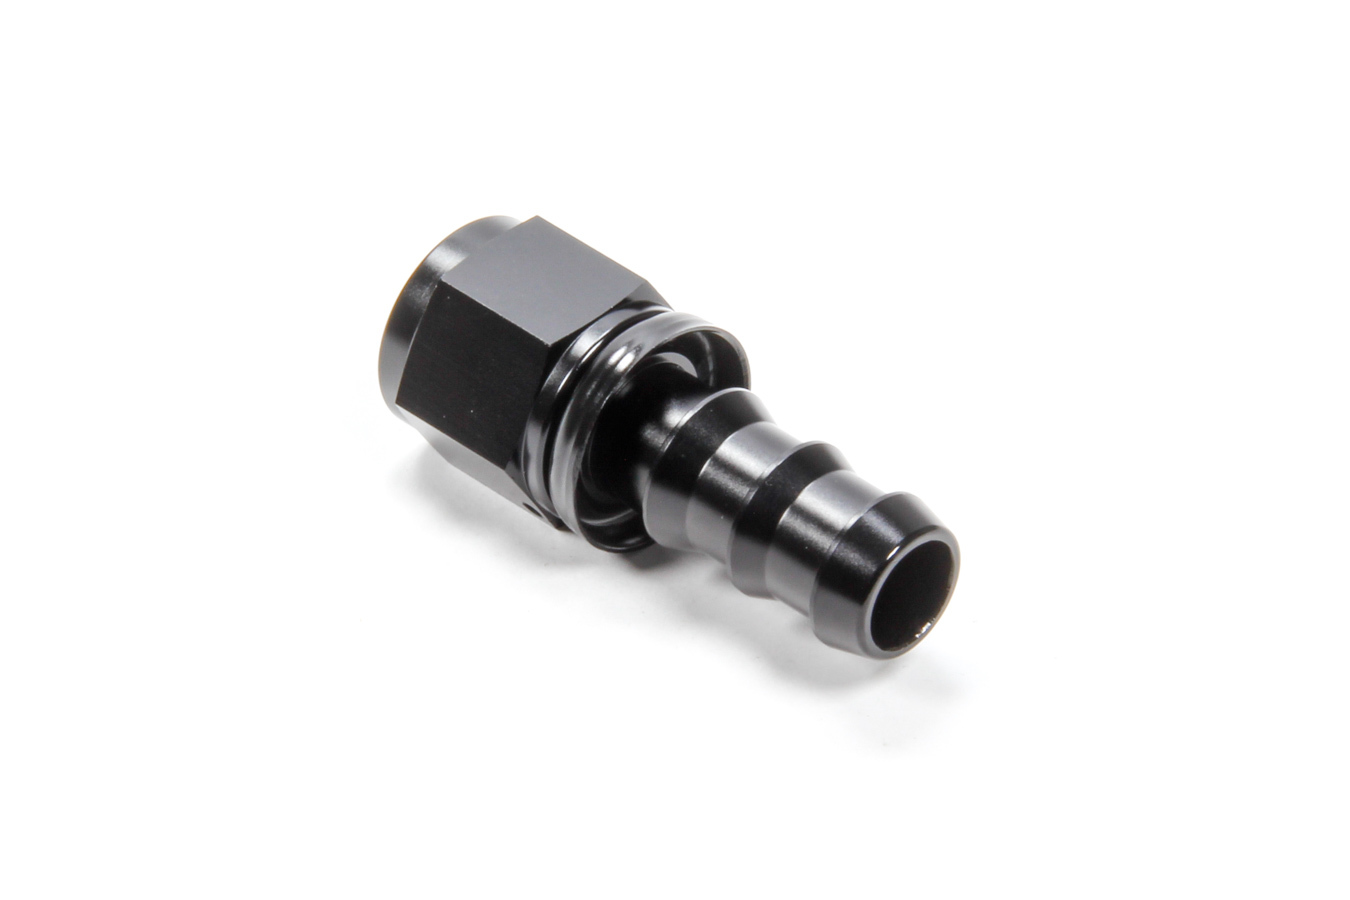 Triple X Race Components HF-10010-BLK Fitting, Hose End, Straight, 10 AN Hose Barb to 10 AN Female, Aluminum, Black Anodized, Each